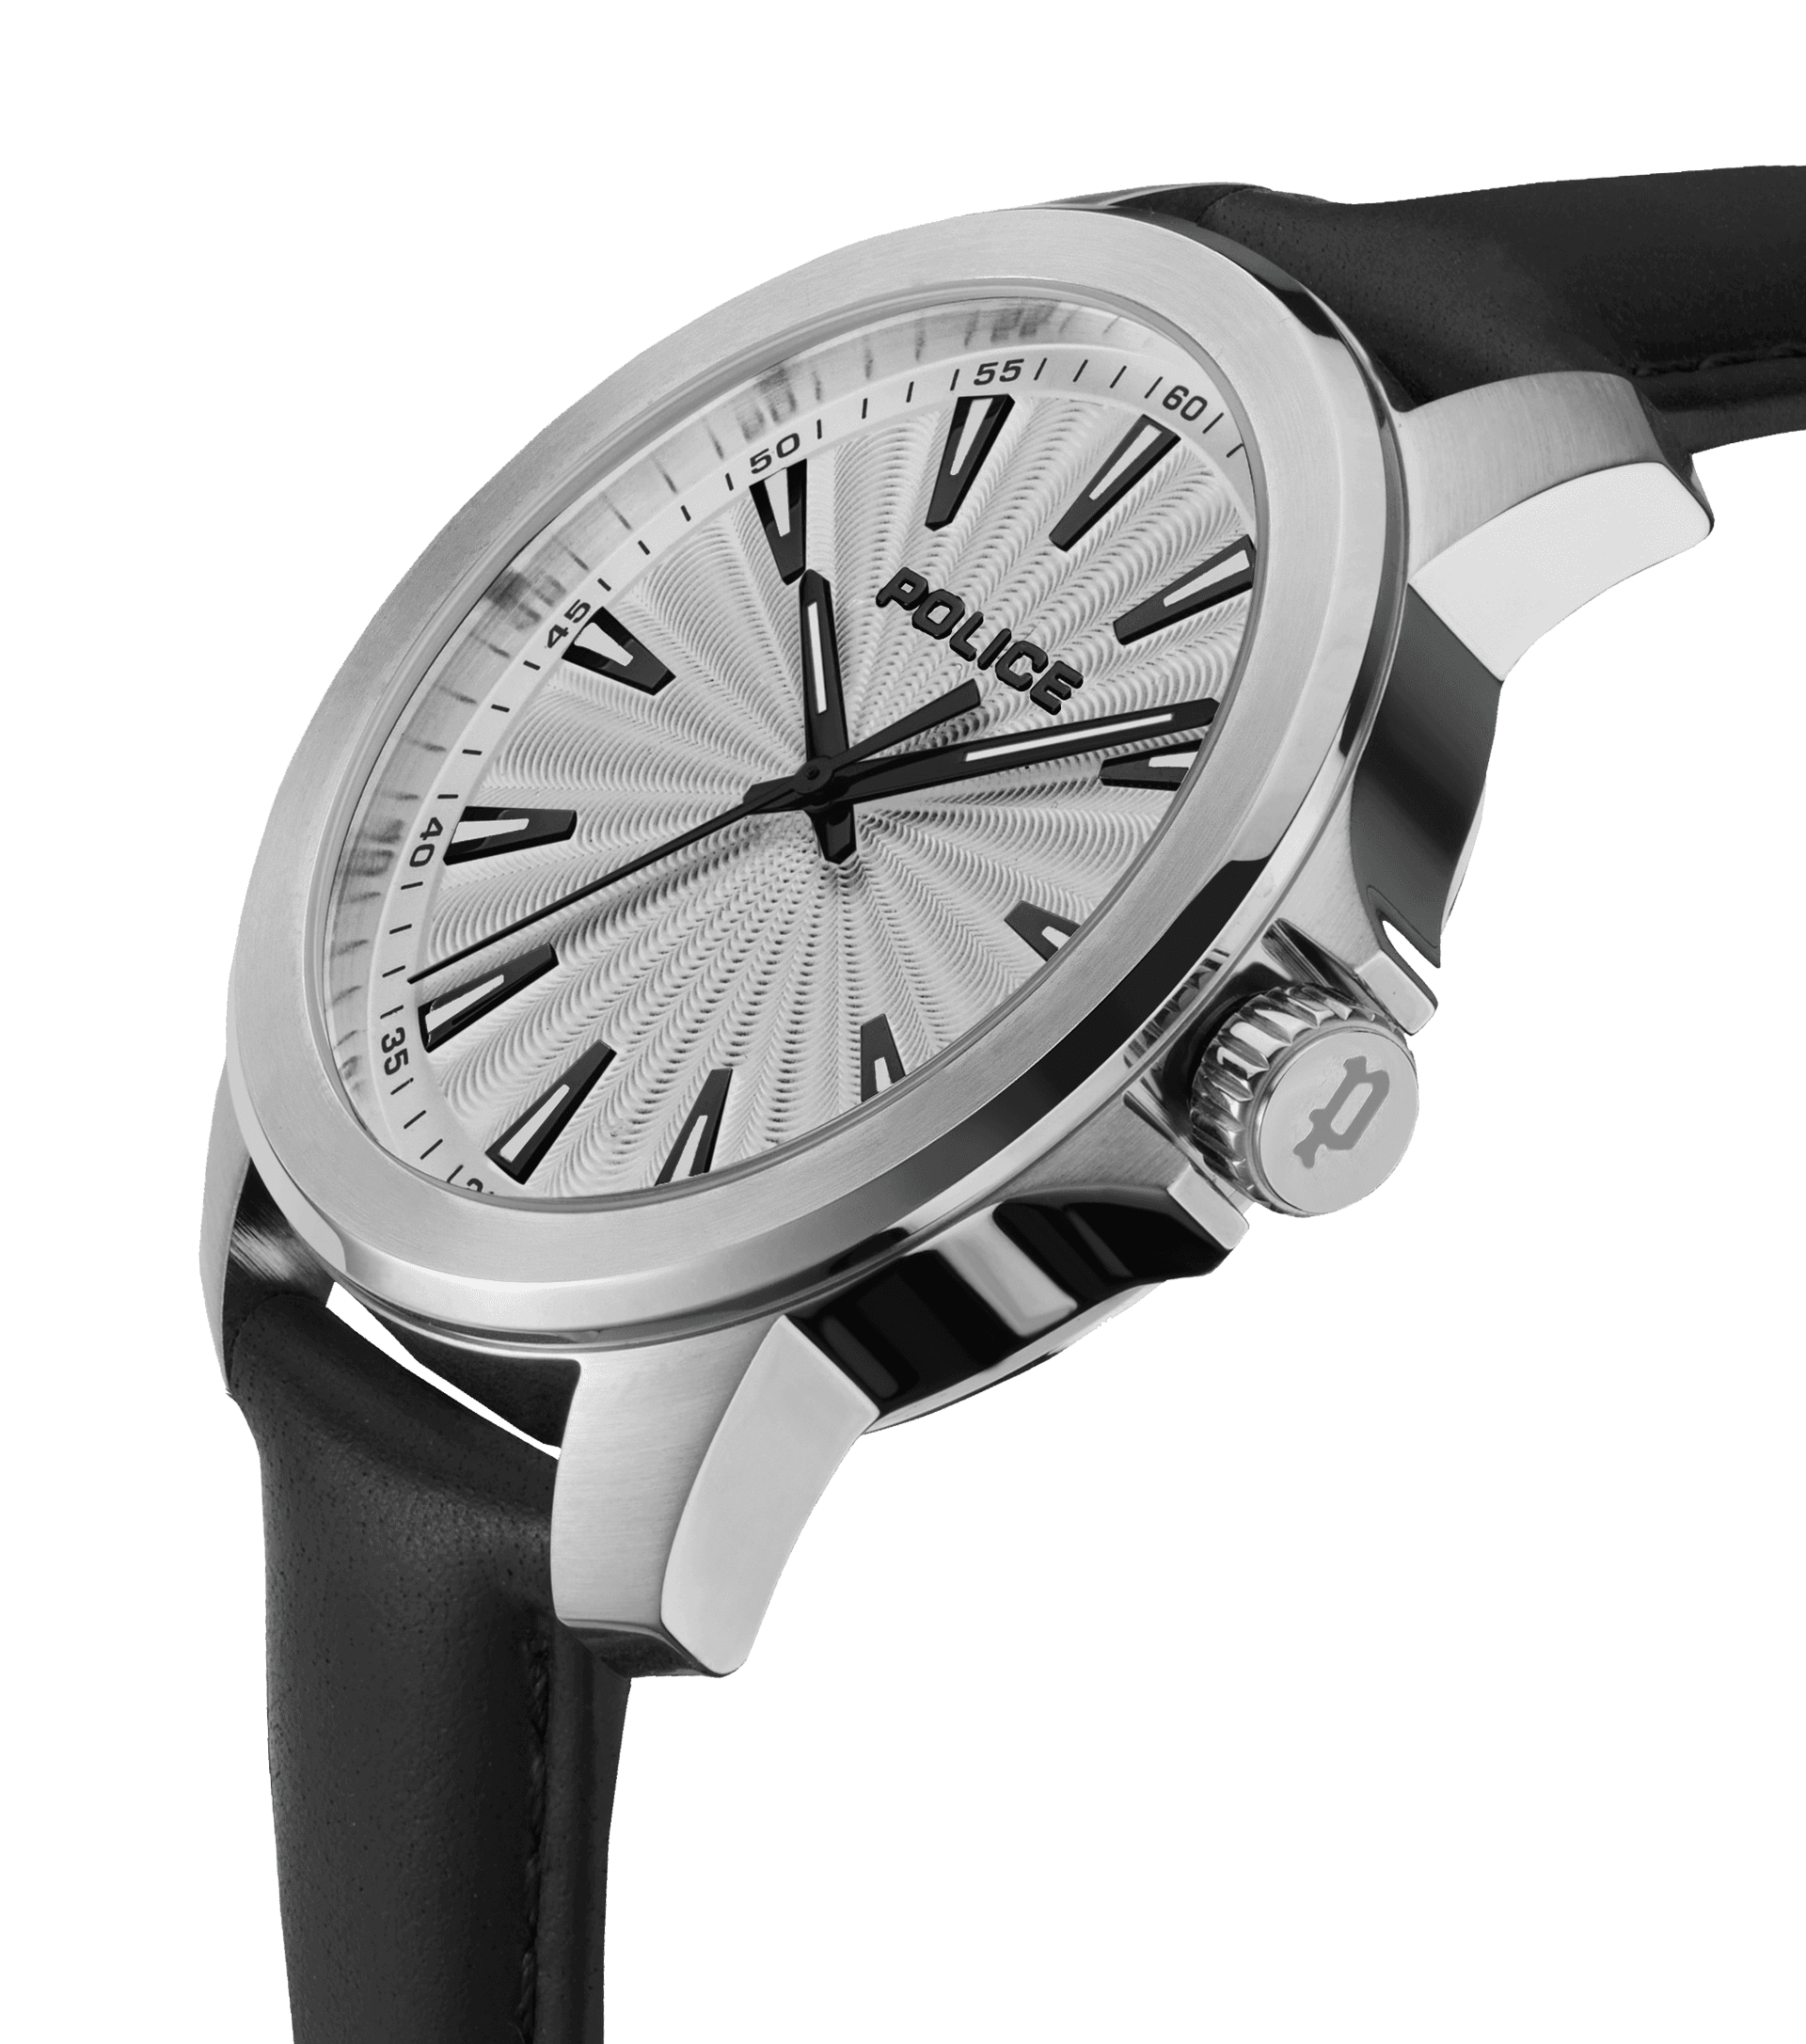 Police watches - Mensor Watch Police For Men Blue, Silver